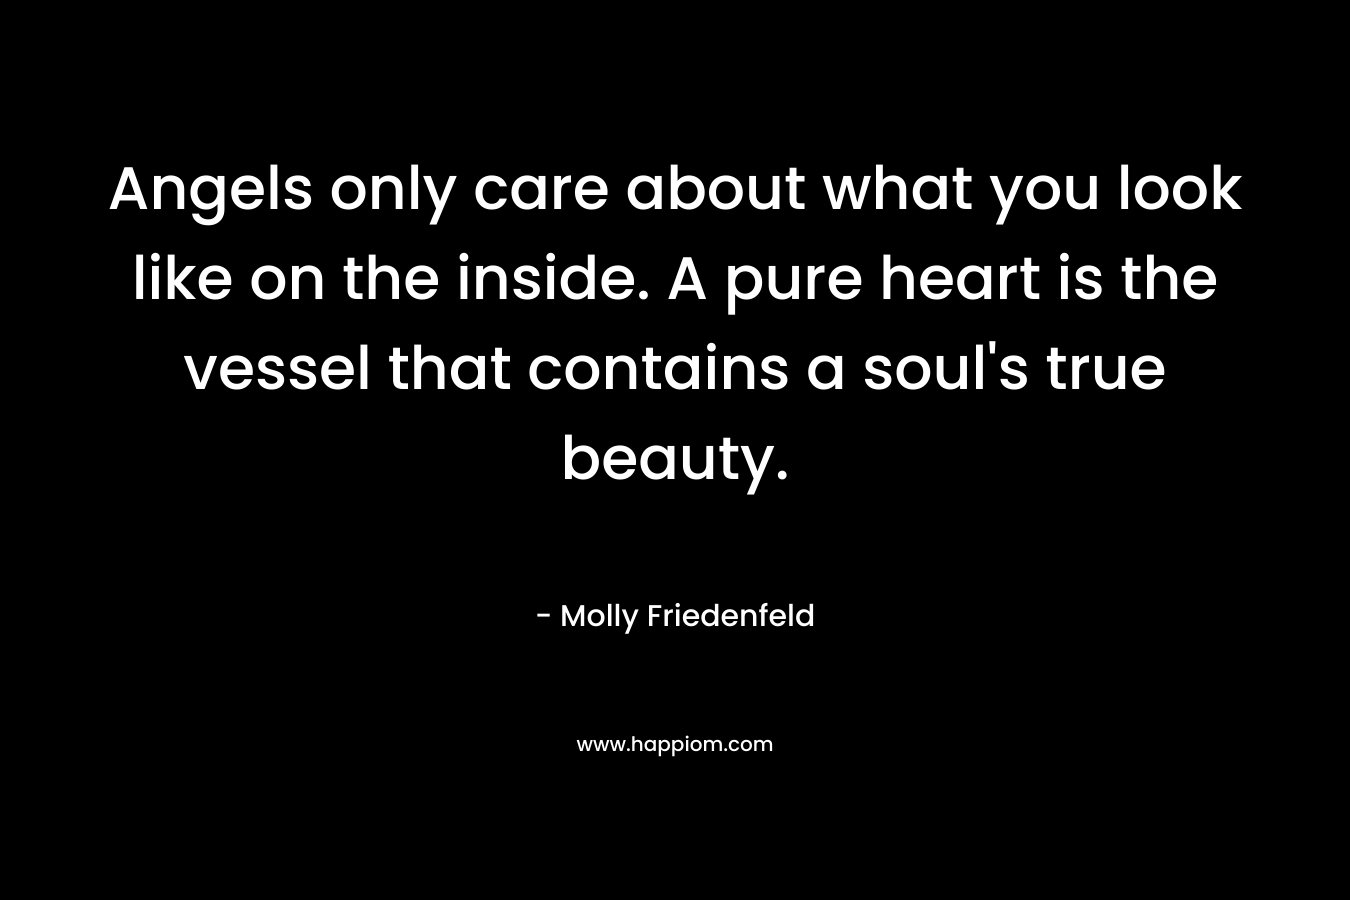 Angels only care about what you look like on the inside. A pure heart is the vessel that contains a soul’s true beauty. – Molly Friedenfeld